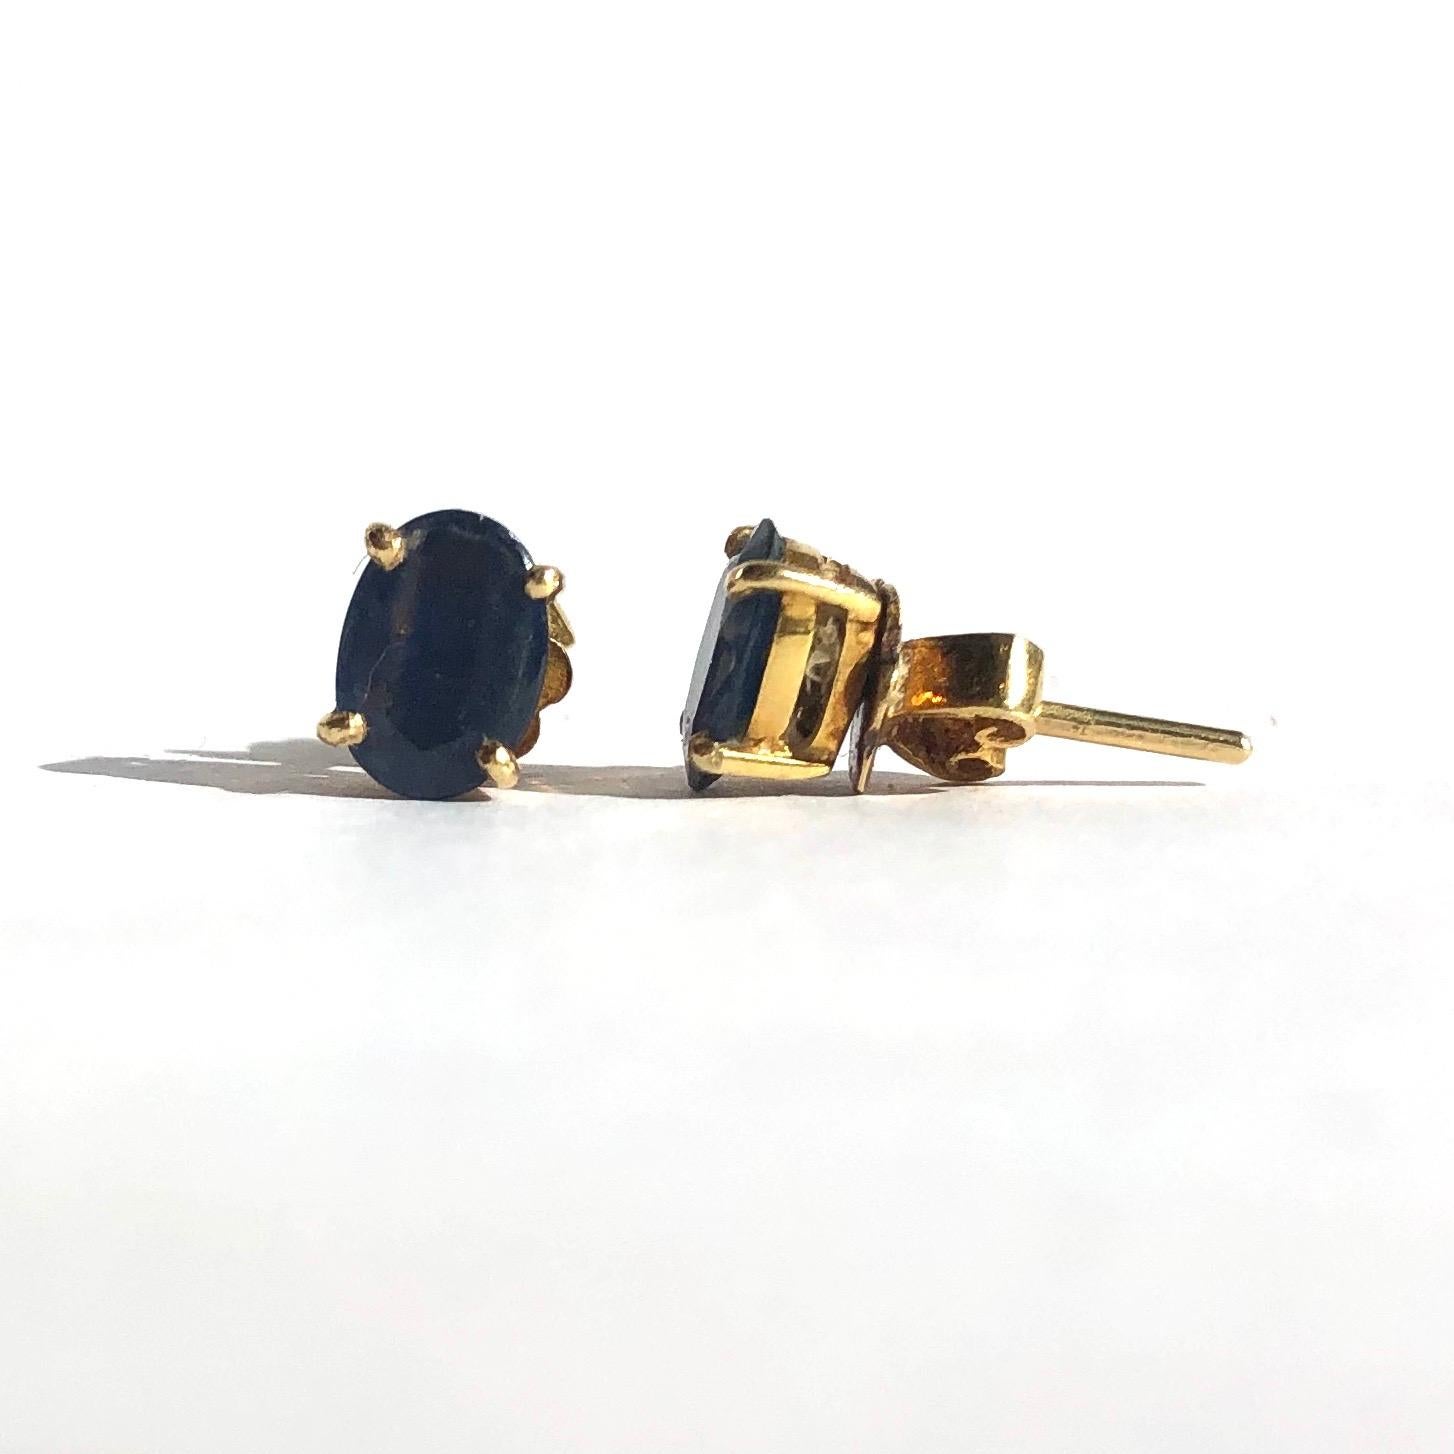 These 70pt sapphires are a gorgeous shade of blue. The stones are set in simple four claw settings which do not distract from the stones themselves. 

Stone Dimensions: 7x5mm 

Weight: 1.7g